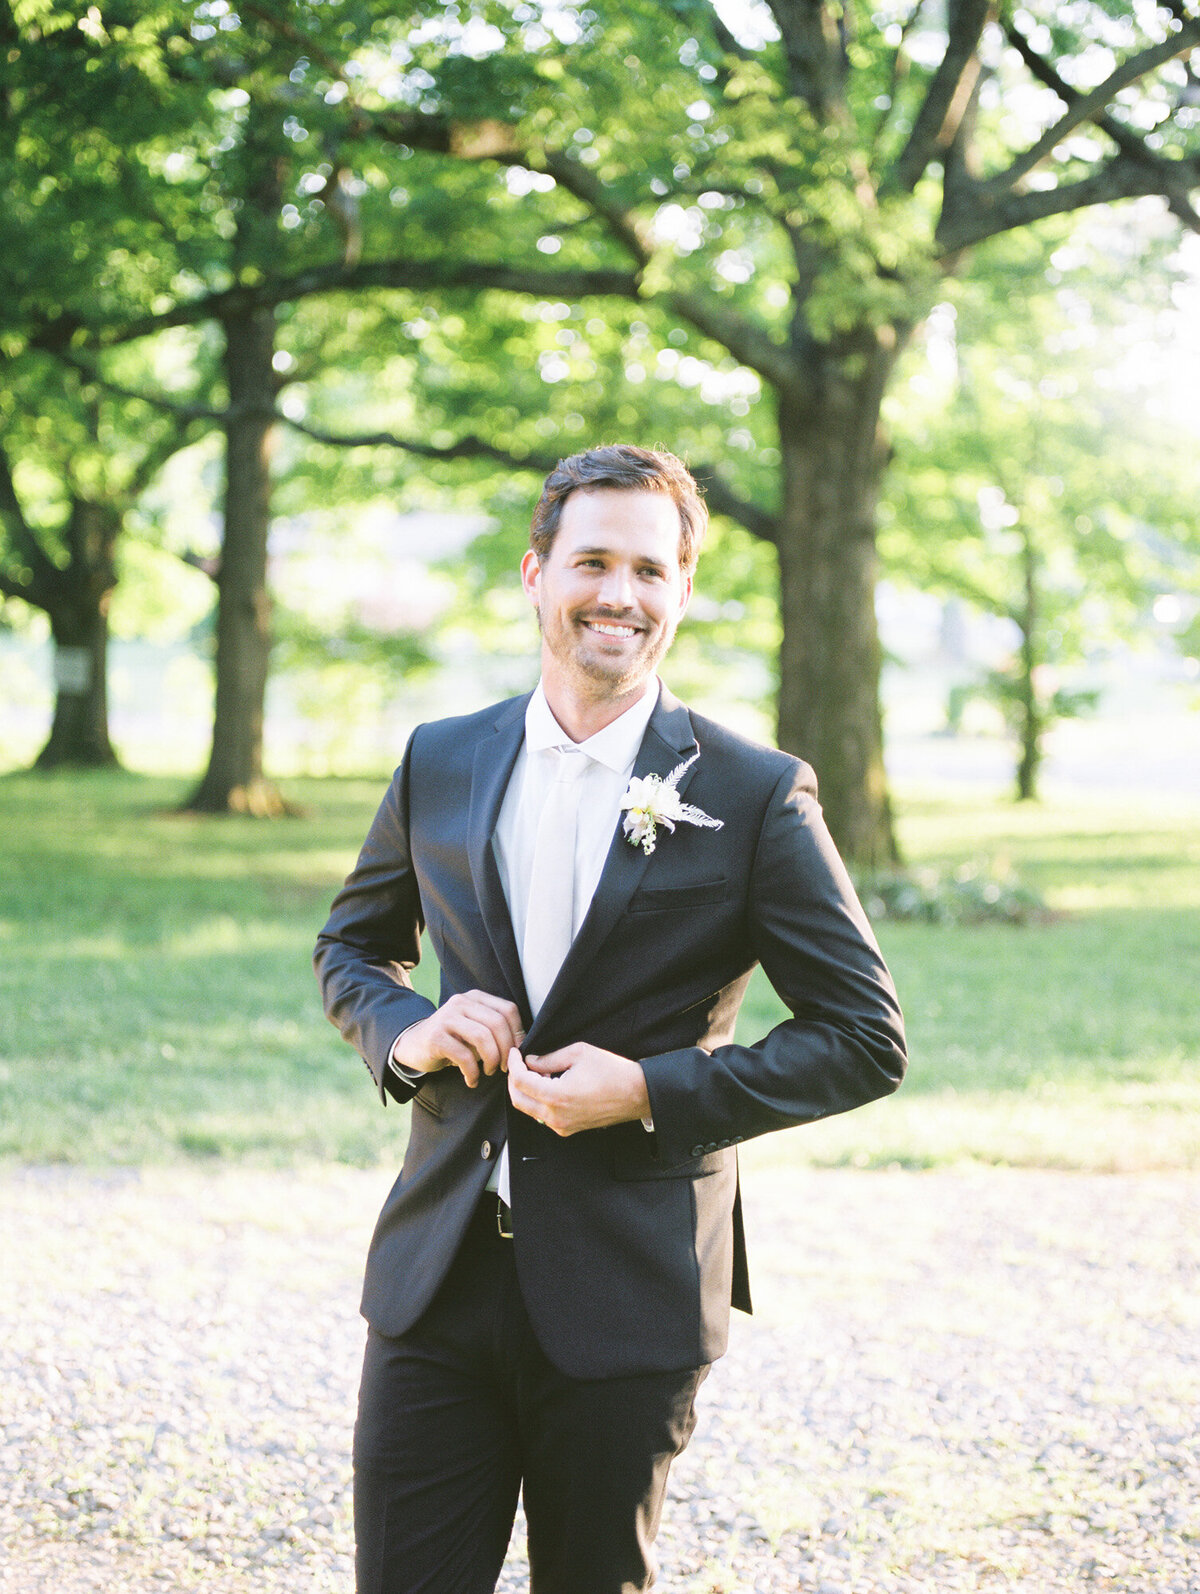 A handsome groom buttons his jacket in front of the lush greenery by Chattanooga wedding photographer, Kelsey Dawn Photography